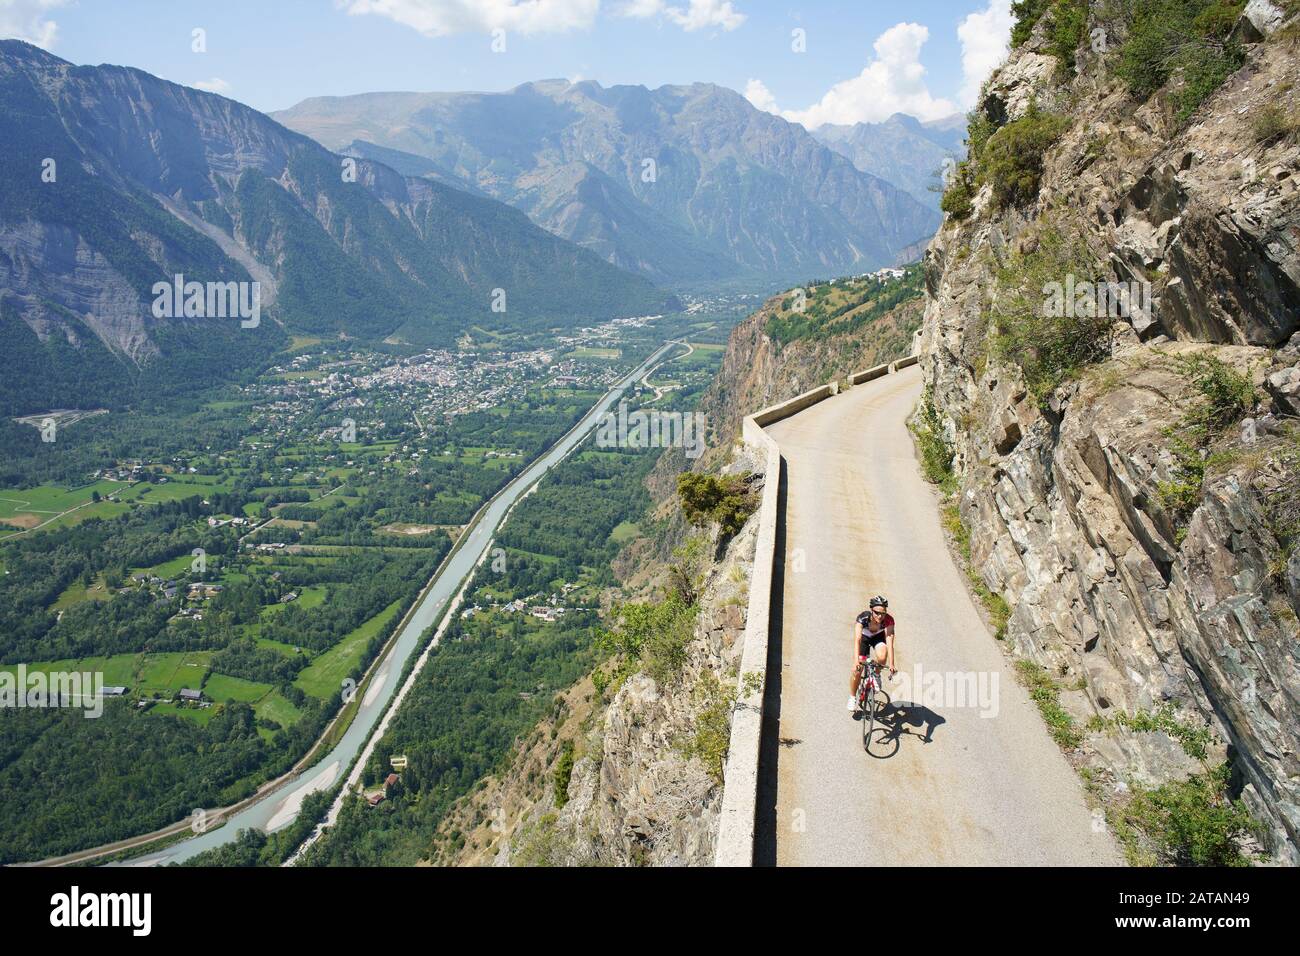 AERIAL VIEW from a 6m mast. Cyclist on a narrow road above a precipitous mountainside. Auris Road, above Le Bourg d'Oisans, France. Stock Photo